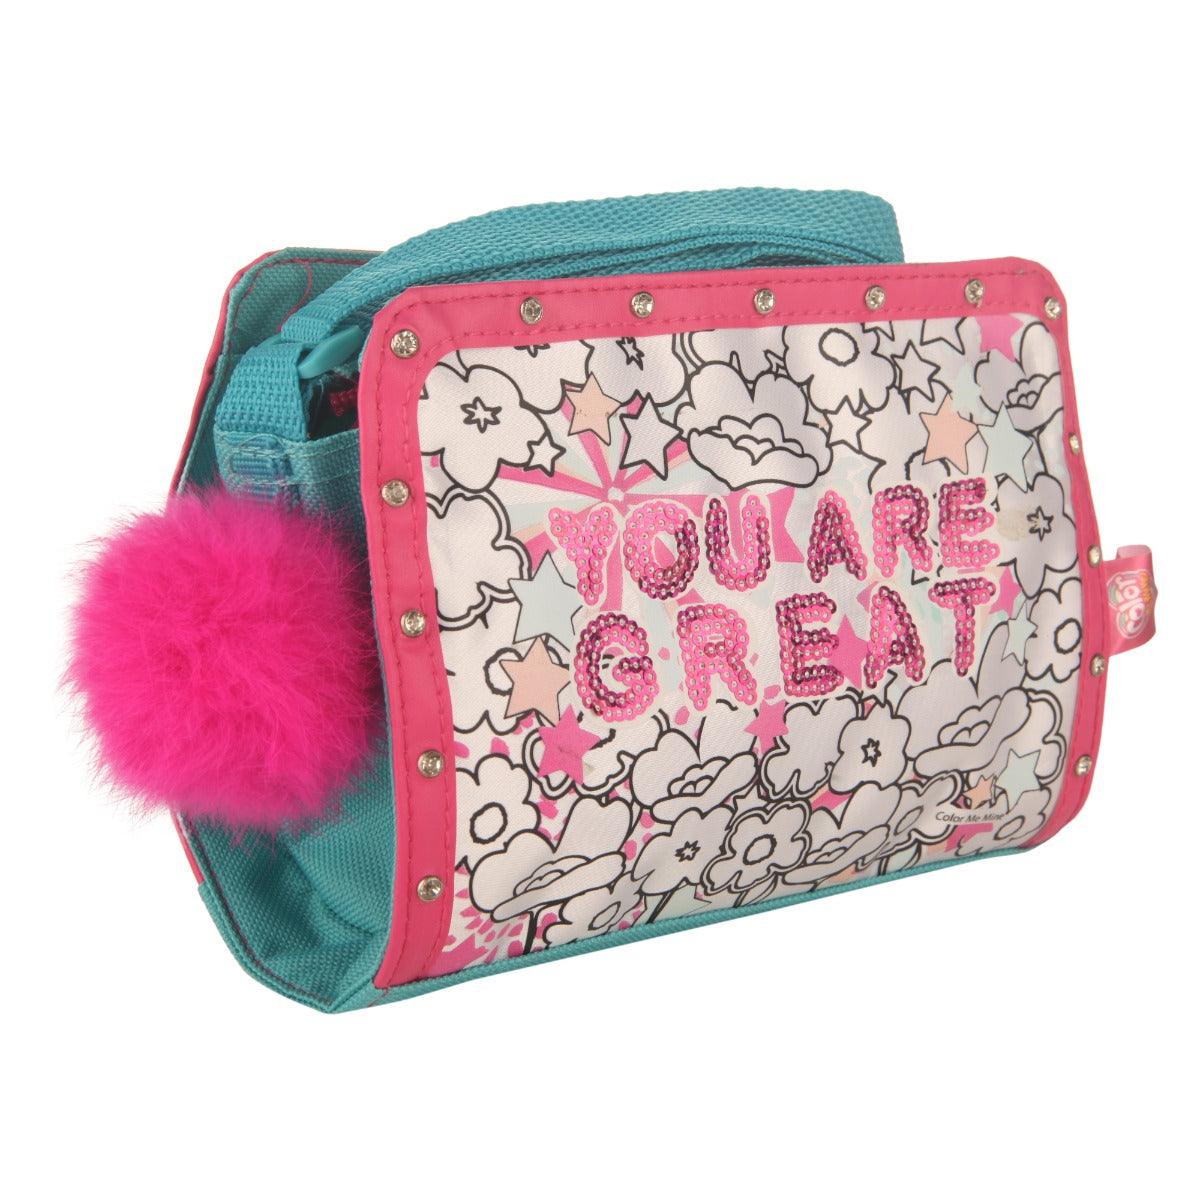 Simba Color Me Mine Glitter Couture Lady Bag